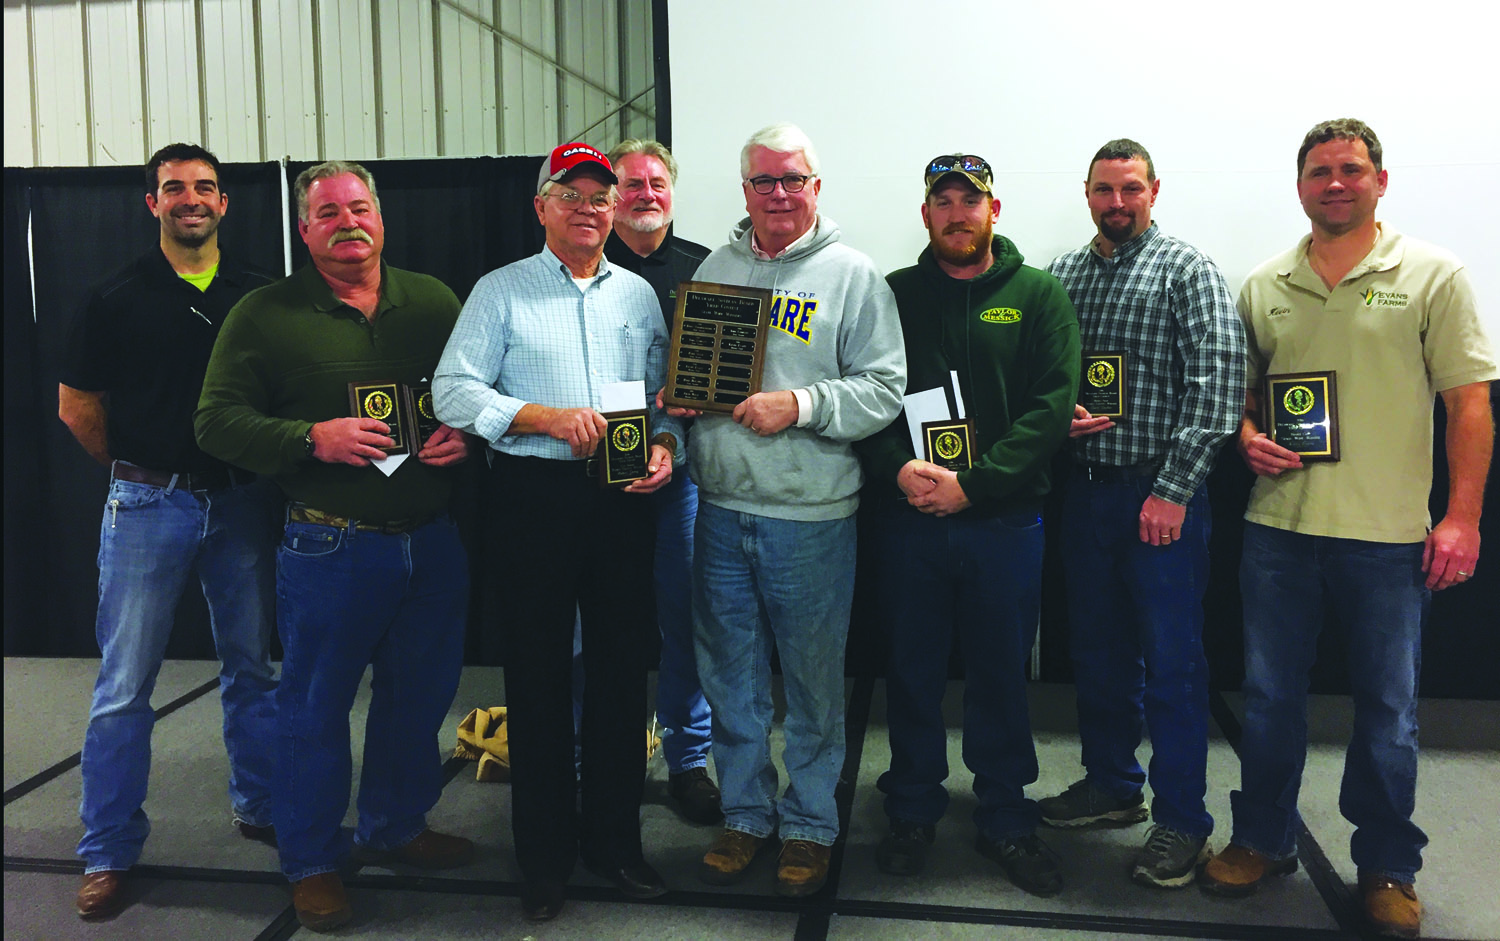 The Delaware Soybean Board is working to increase soybean yields by recognizing top growers in the state.